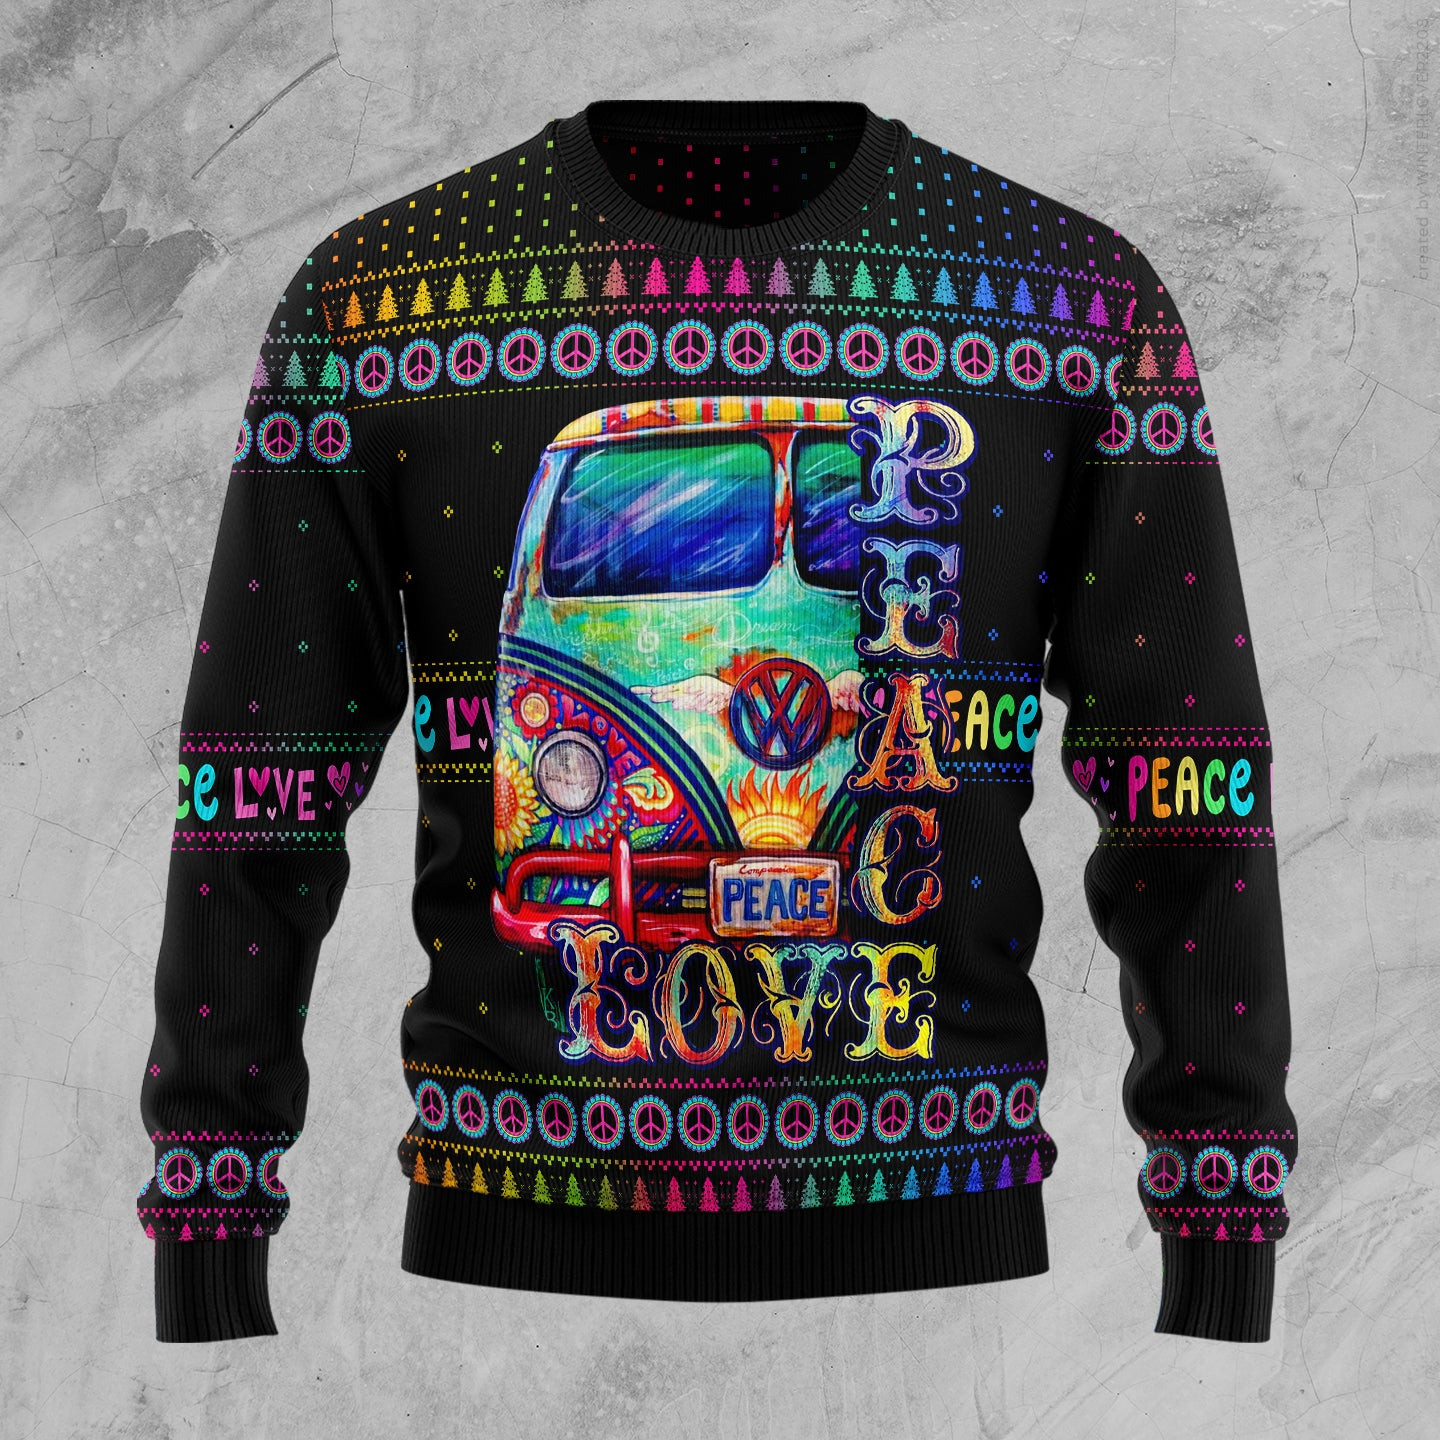 Hippie Peace Love Ugly Christmas Sweater, Ugly Sweater For Men Women, Holiday Sweater